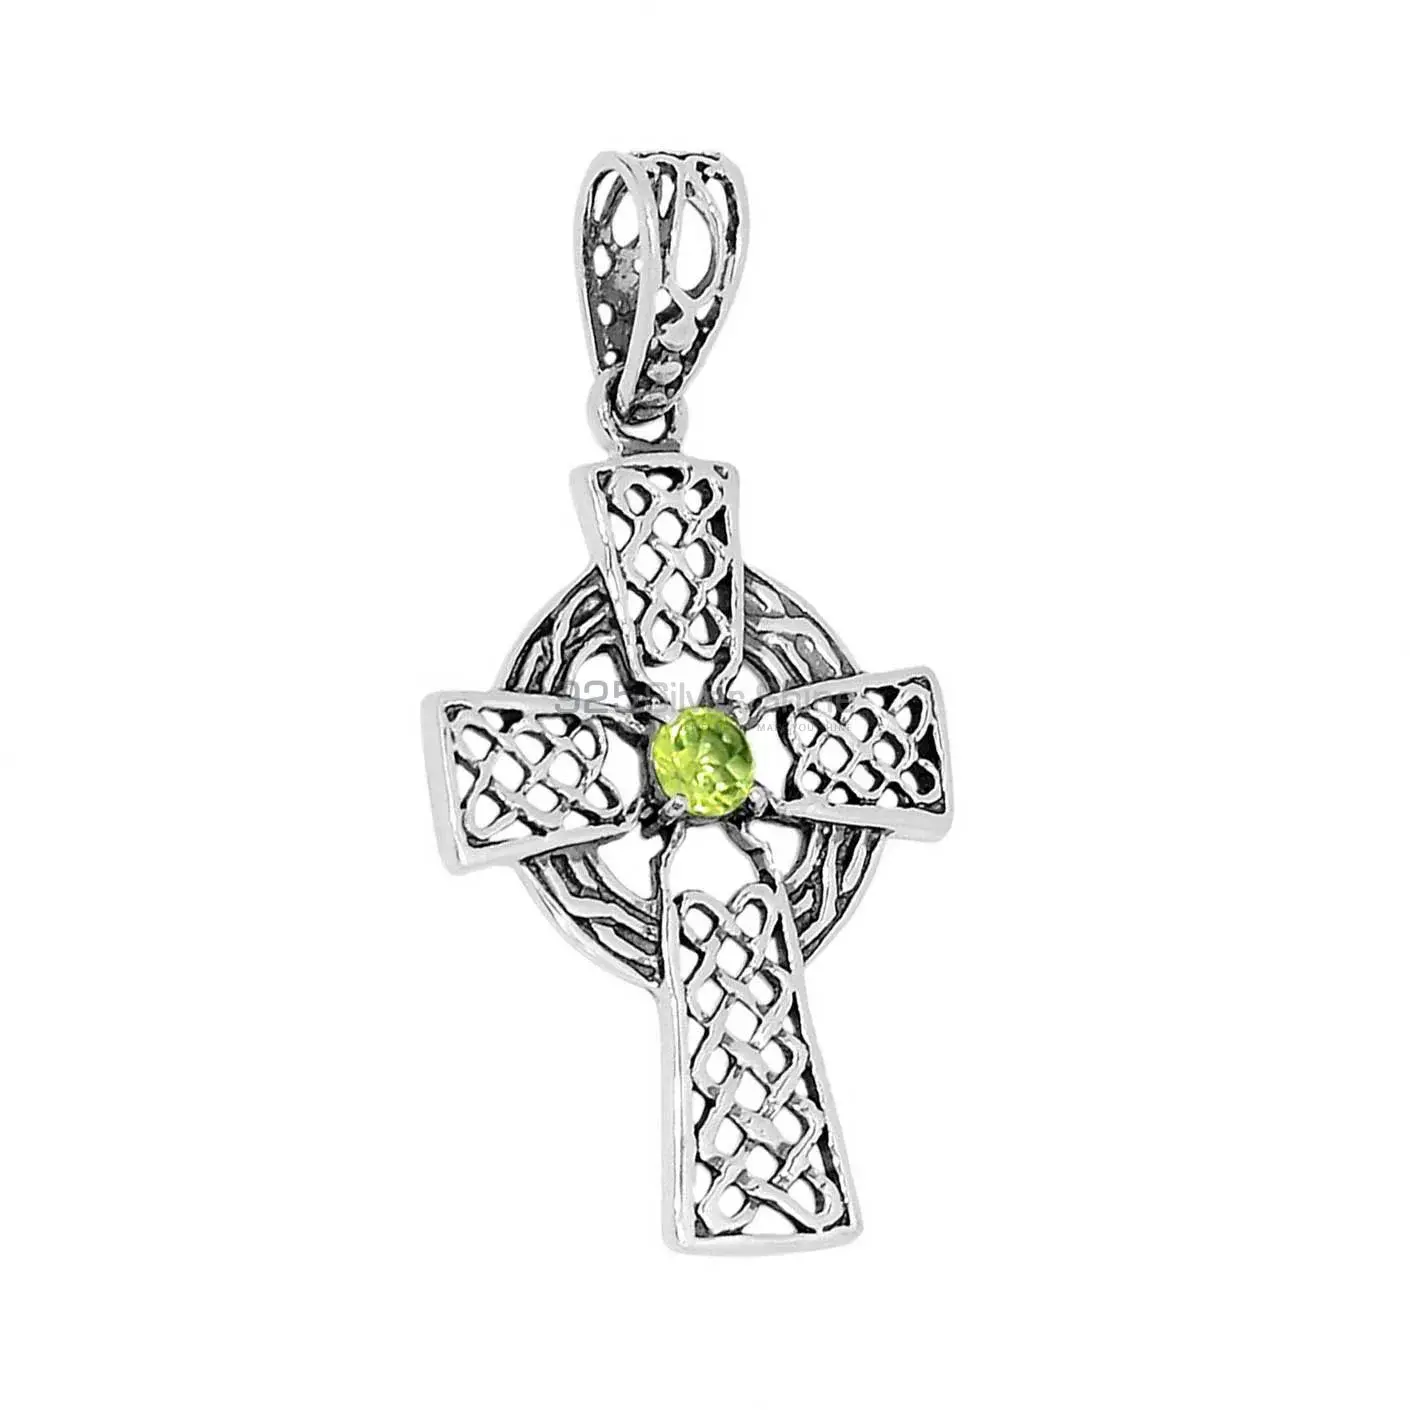 Top Quality 925 Solid Silver Pendants Exporters In Peridot Gemstone Jewelry 925SSP342-3_1